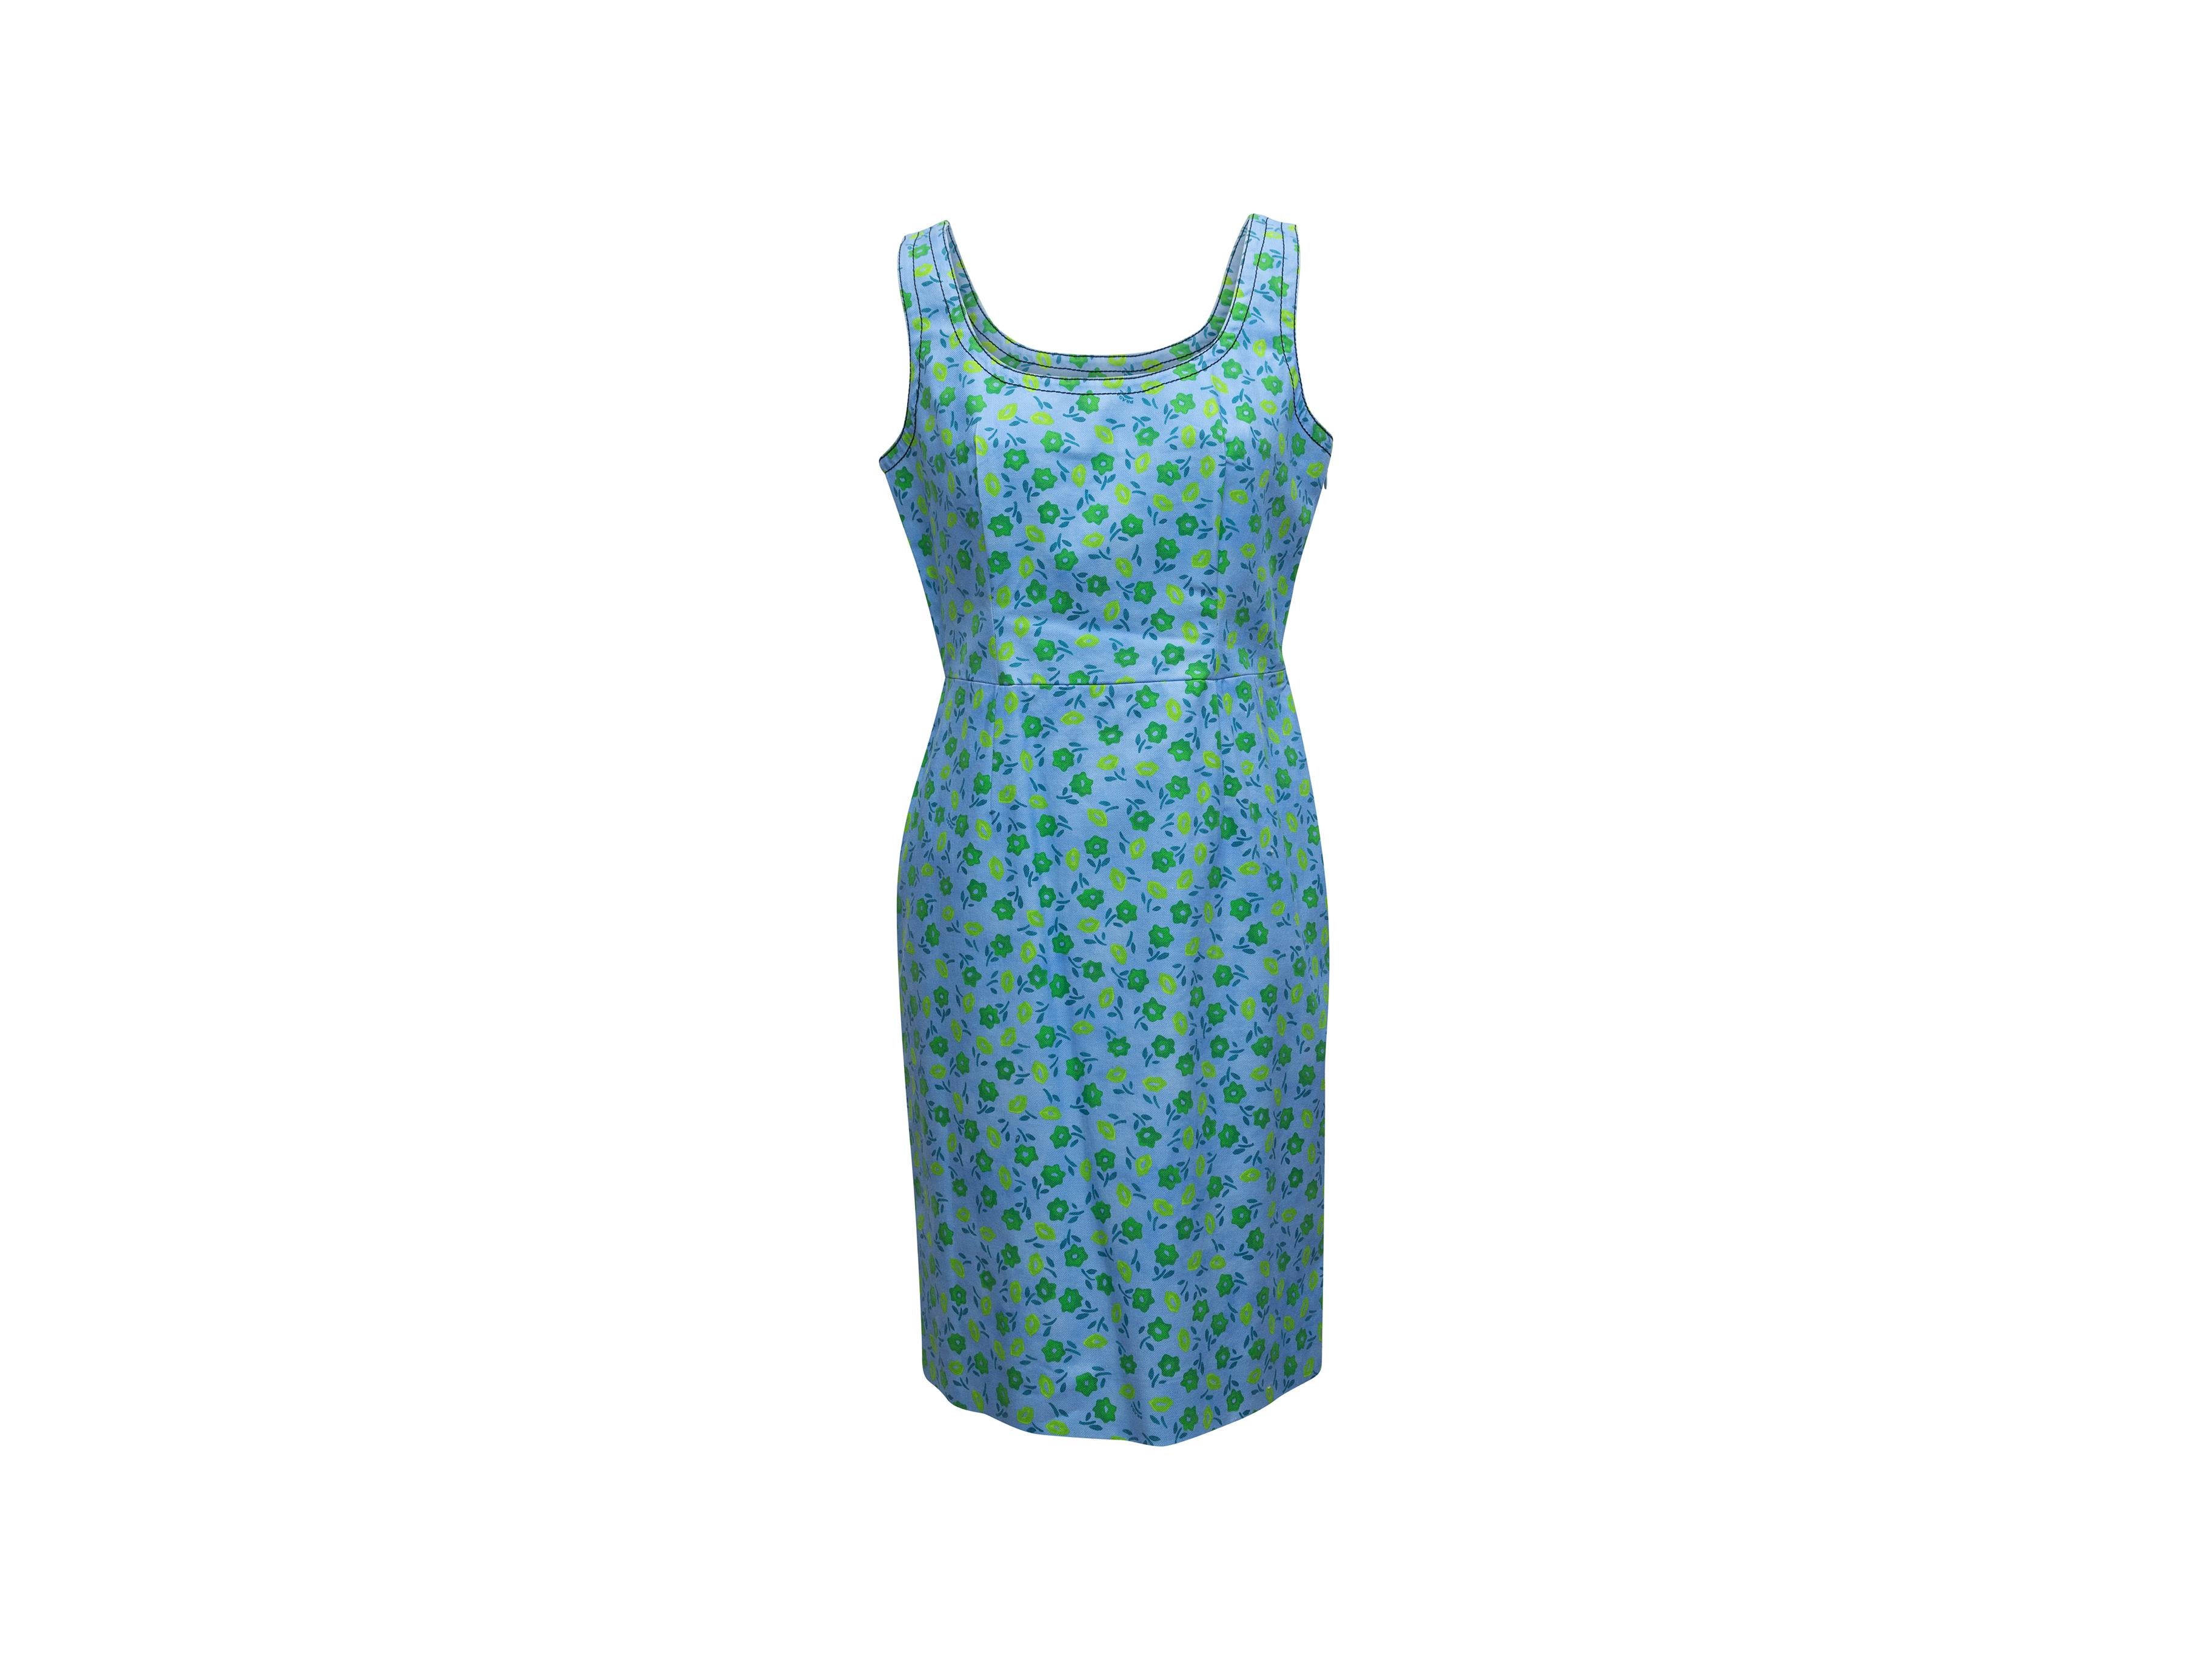 Product details: Light blue and green floral print sleeveless dress by Prada. Scoop neckline. Zip closure at side. Designer size 46. 33